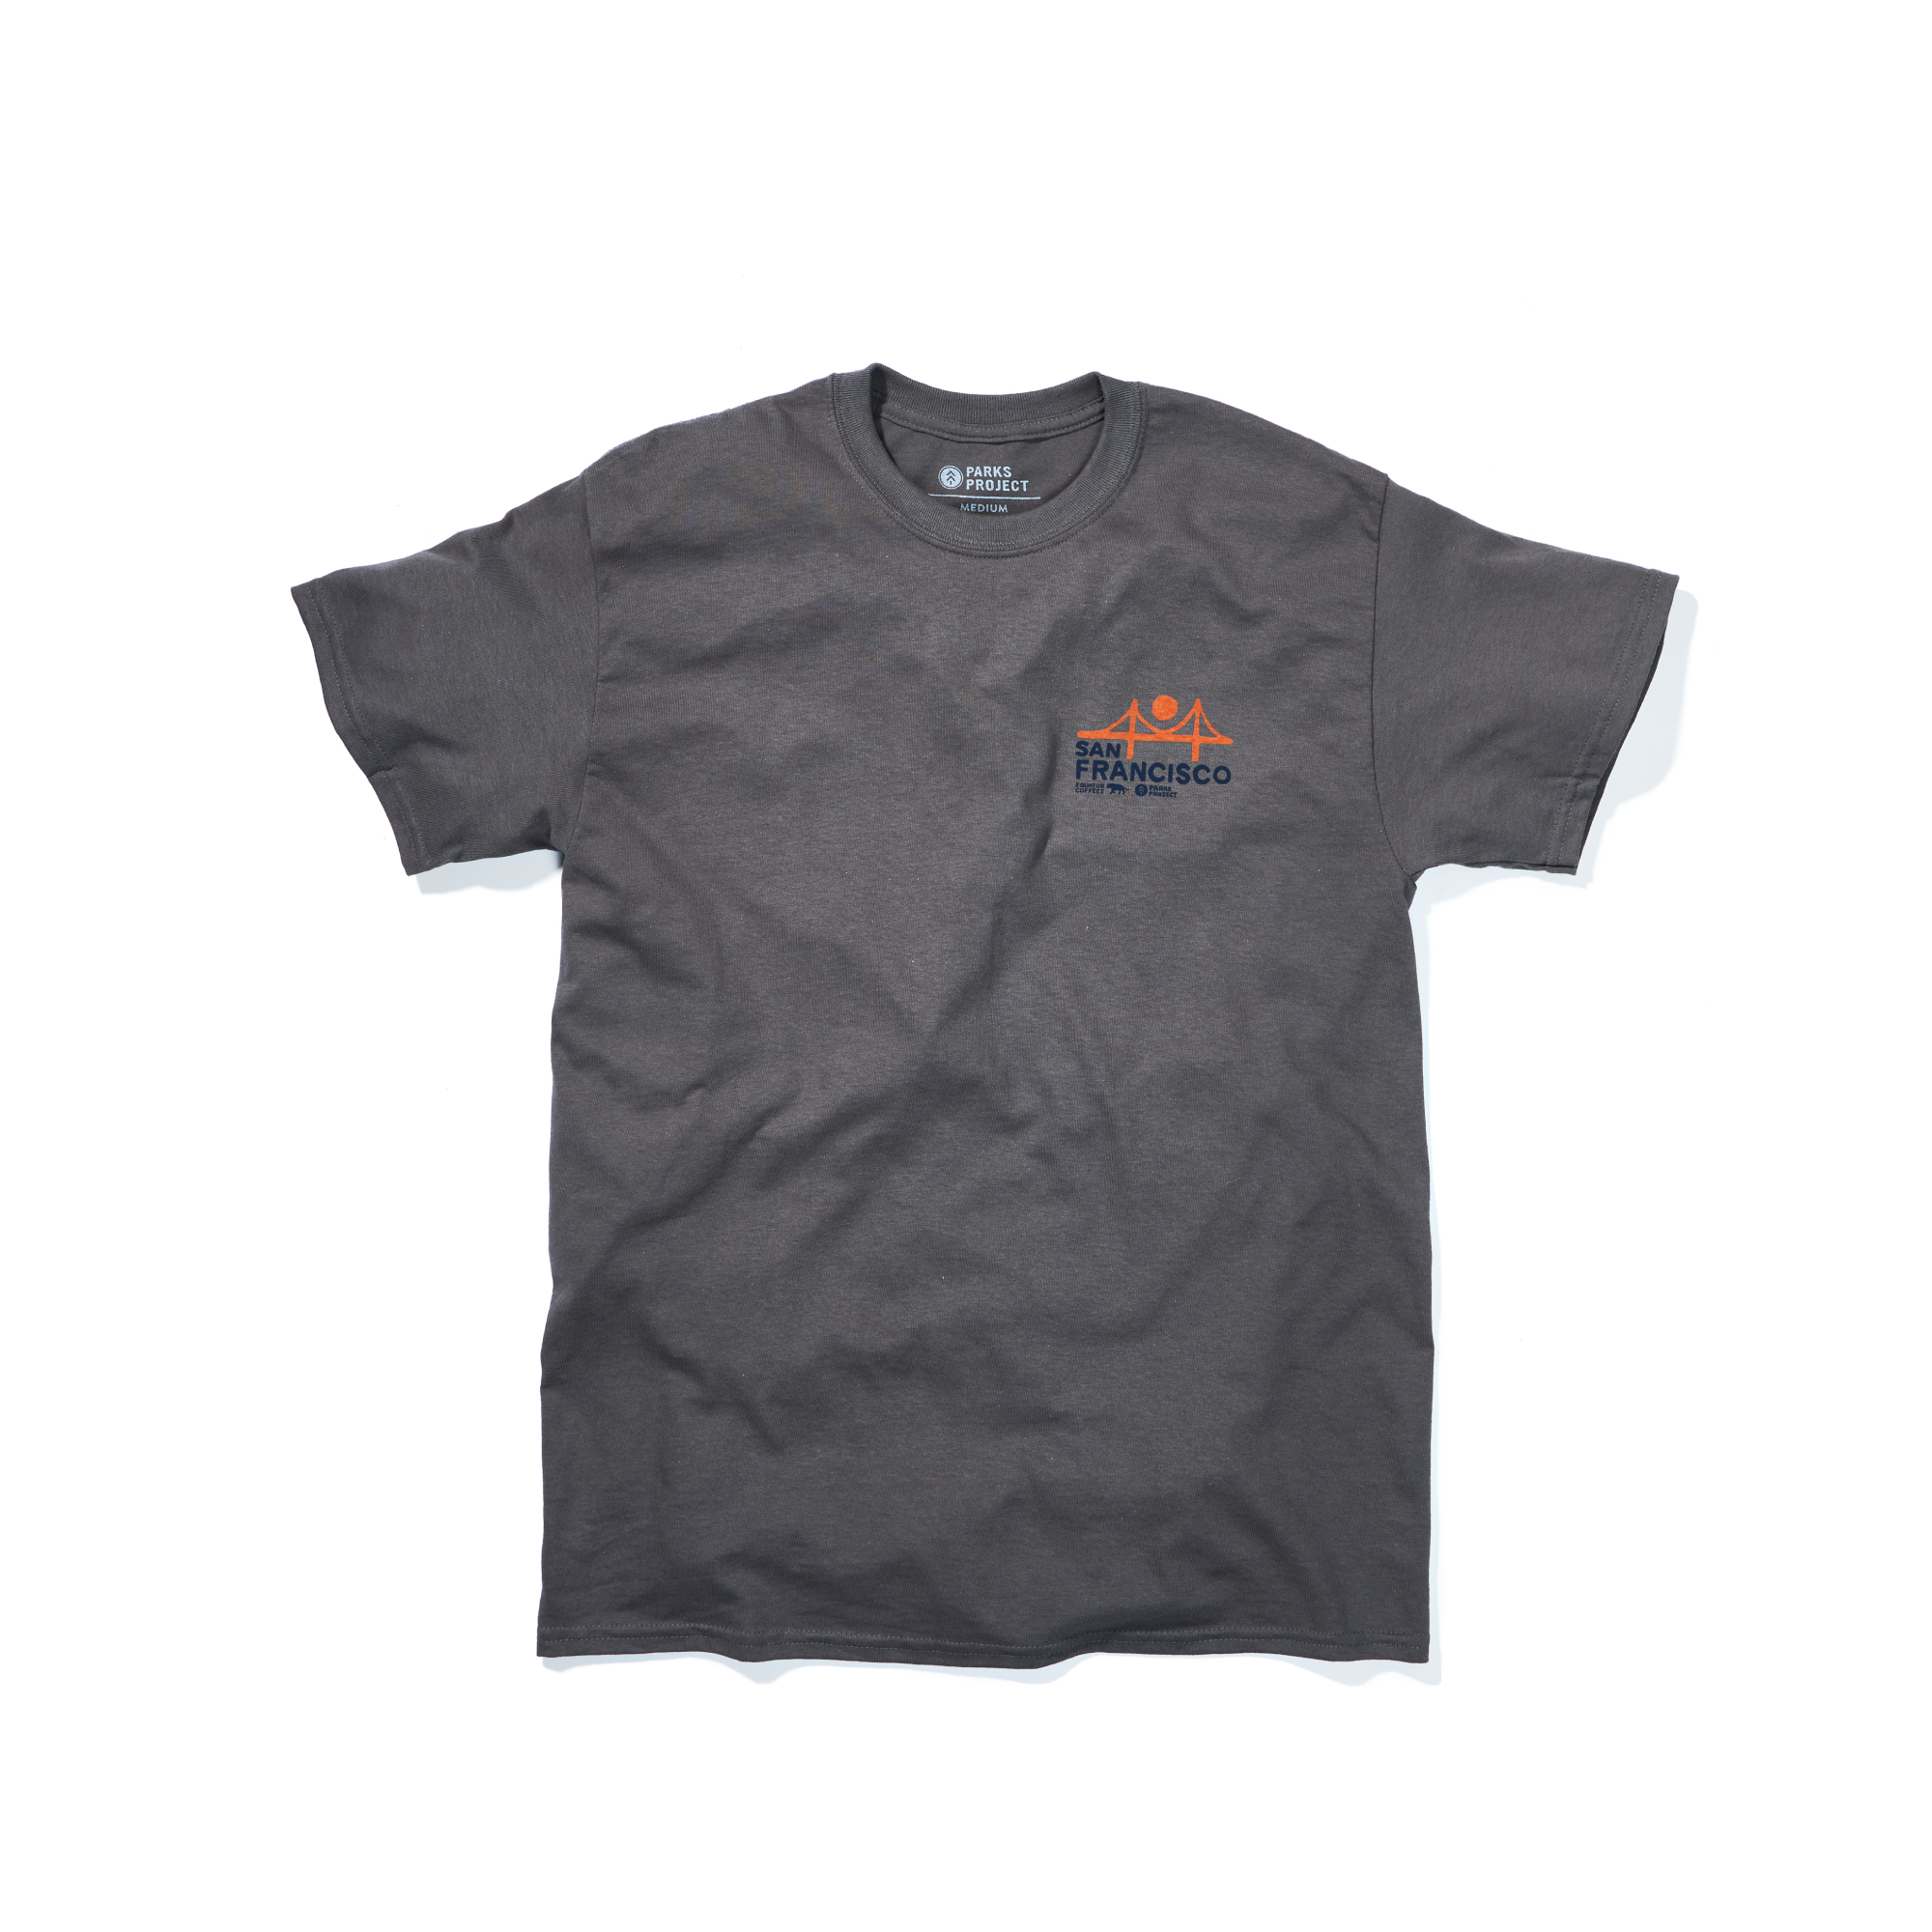 Parks Project Tee - Charcoal